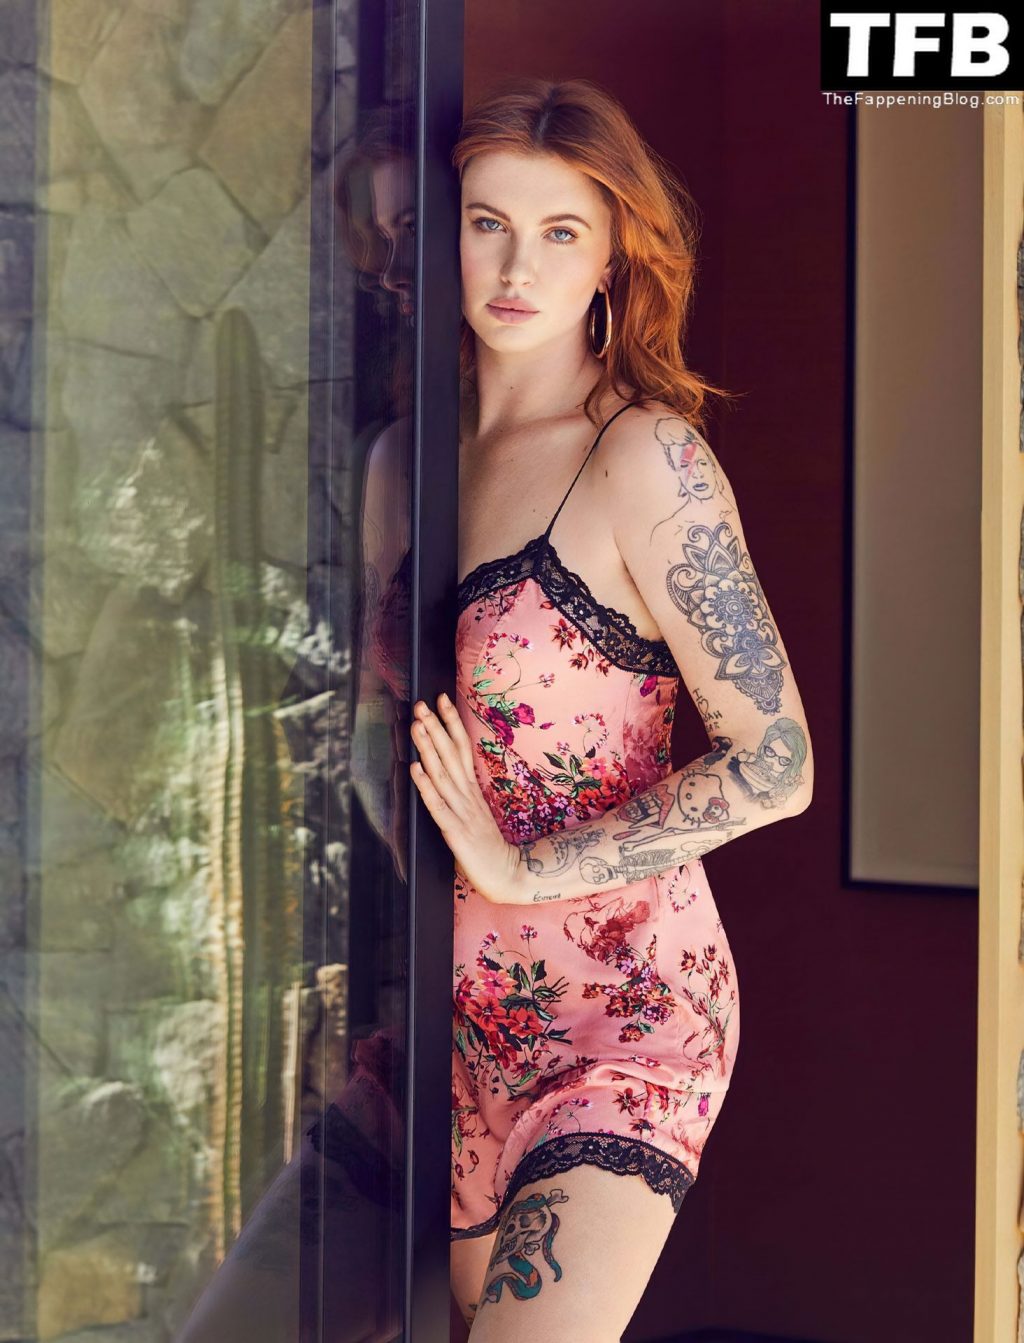 Ireland Baldwin Shows Off Her Sexy Figure as She Poses in Lingerie for BCBGMAXAZRIA (10 Photos)